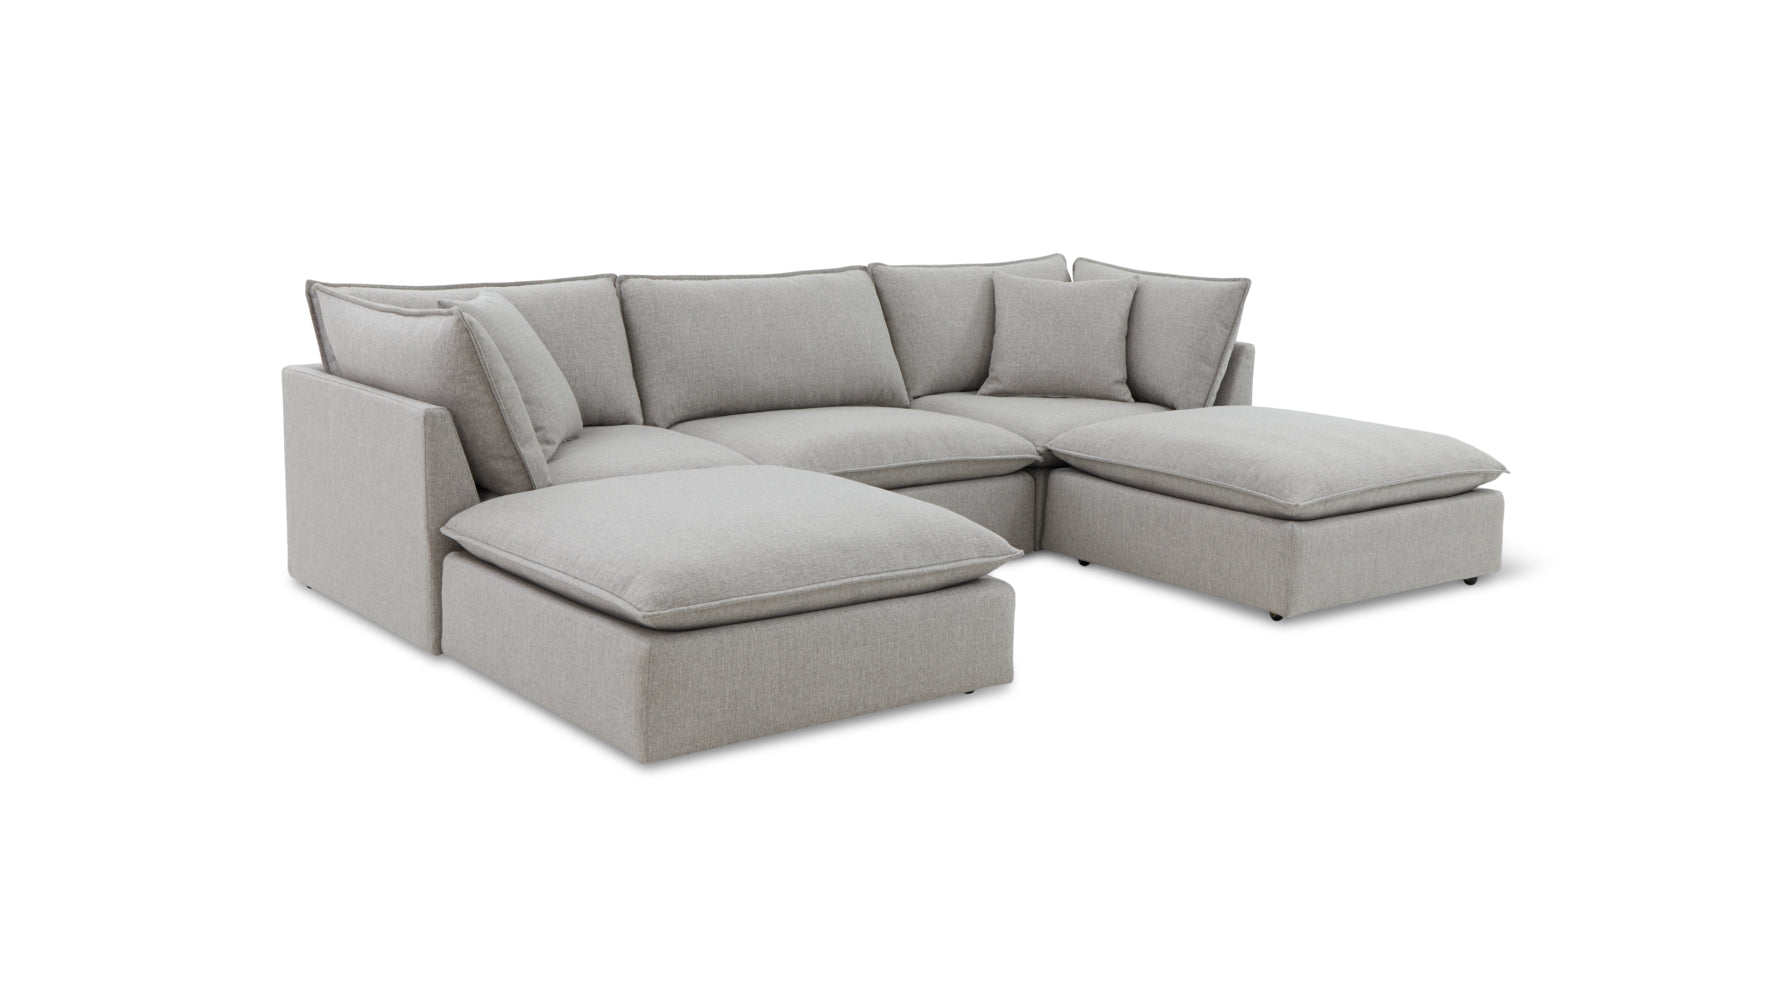 Chill Time 5-Piece Modular U-Shaped Sectional, Heather - Image 2